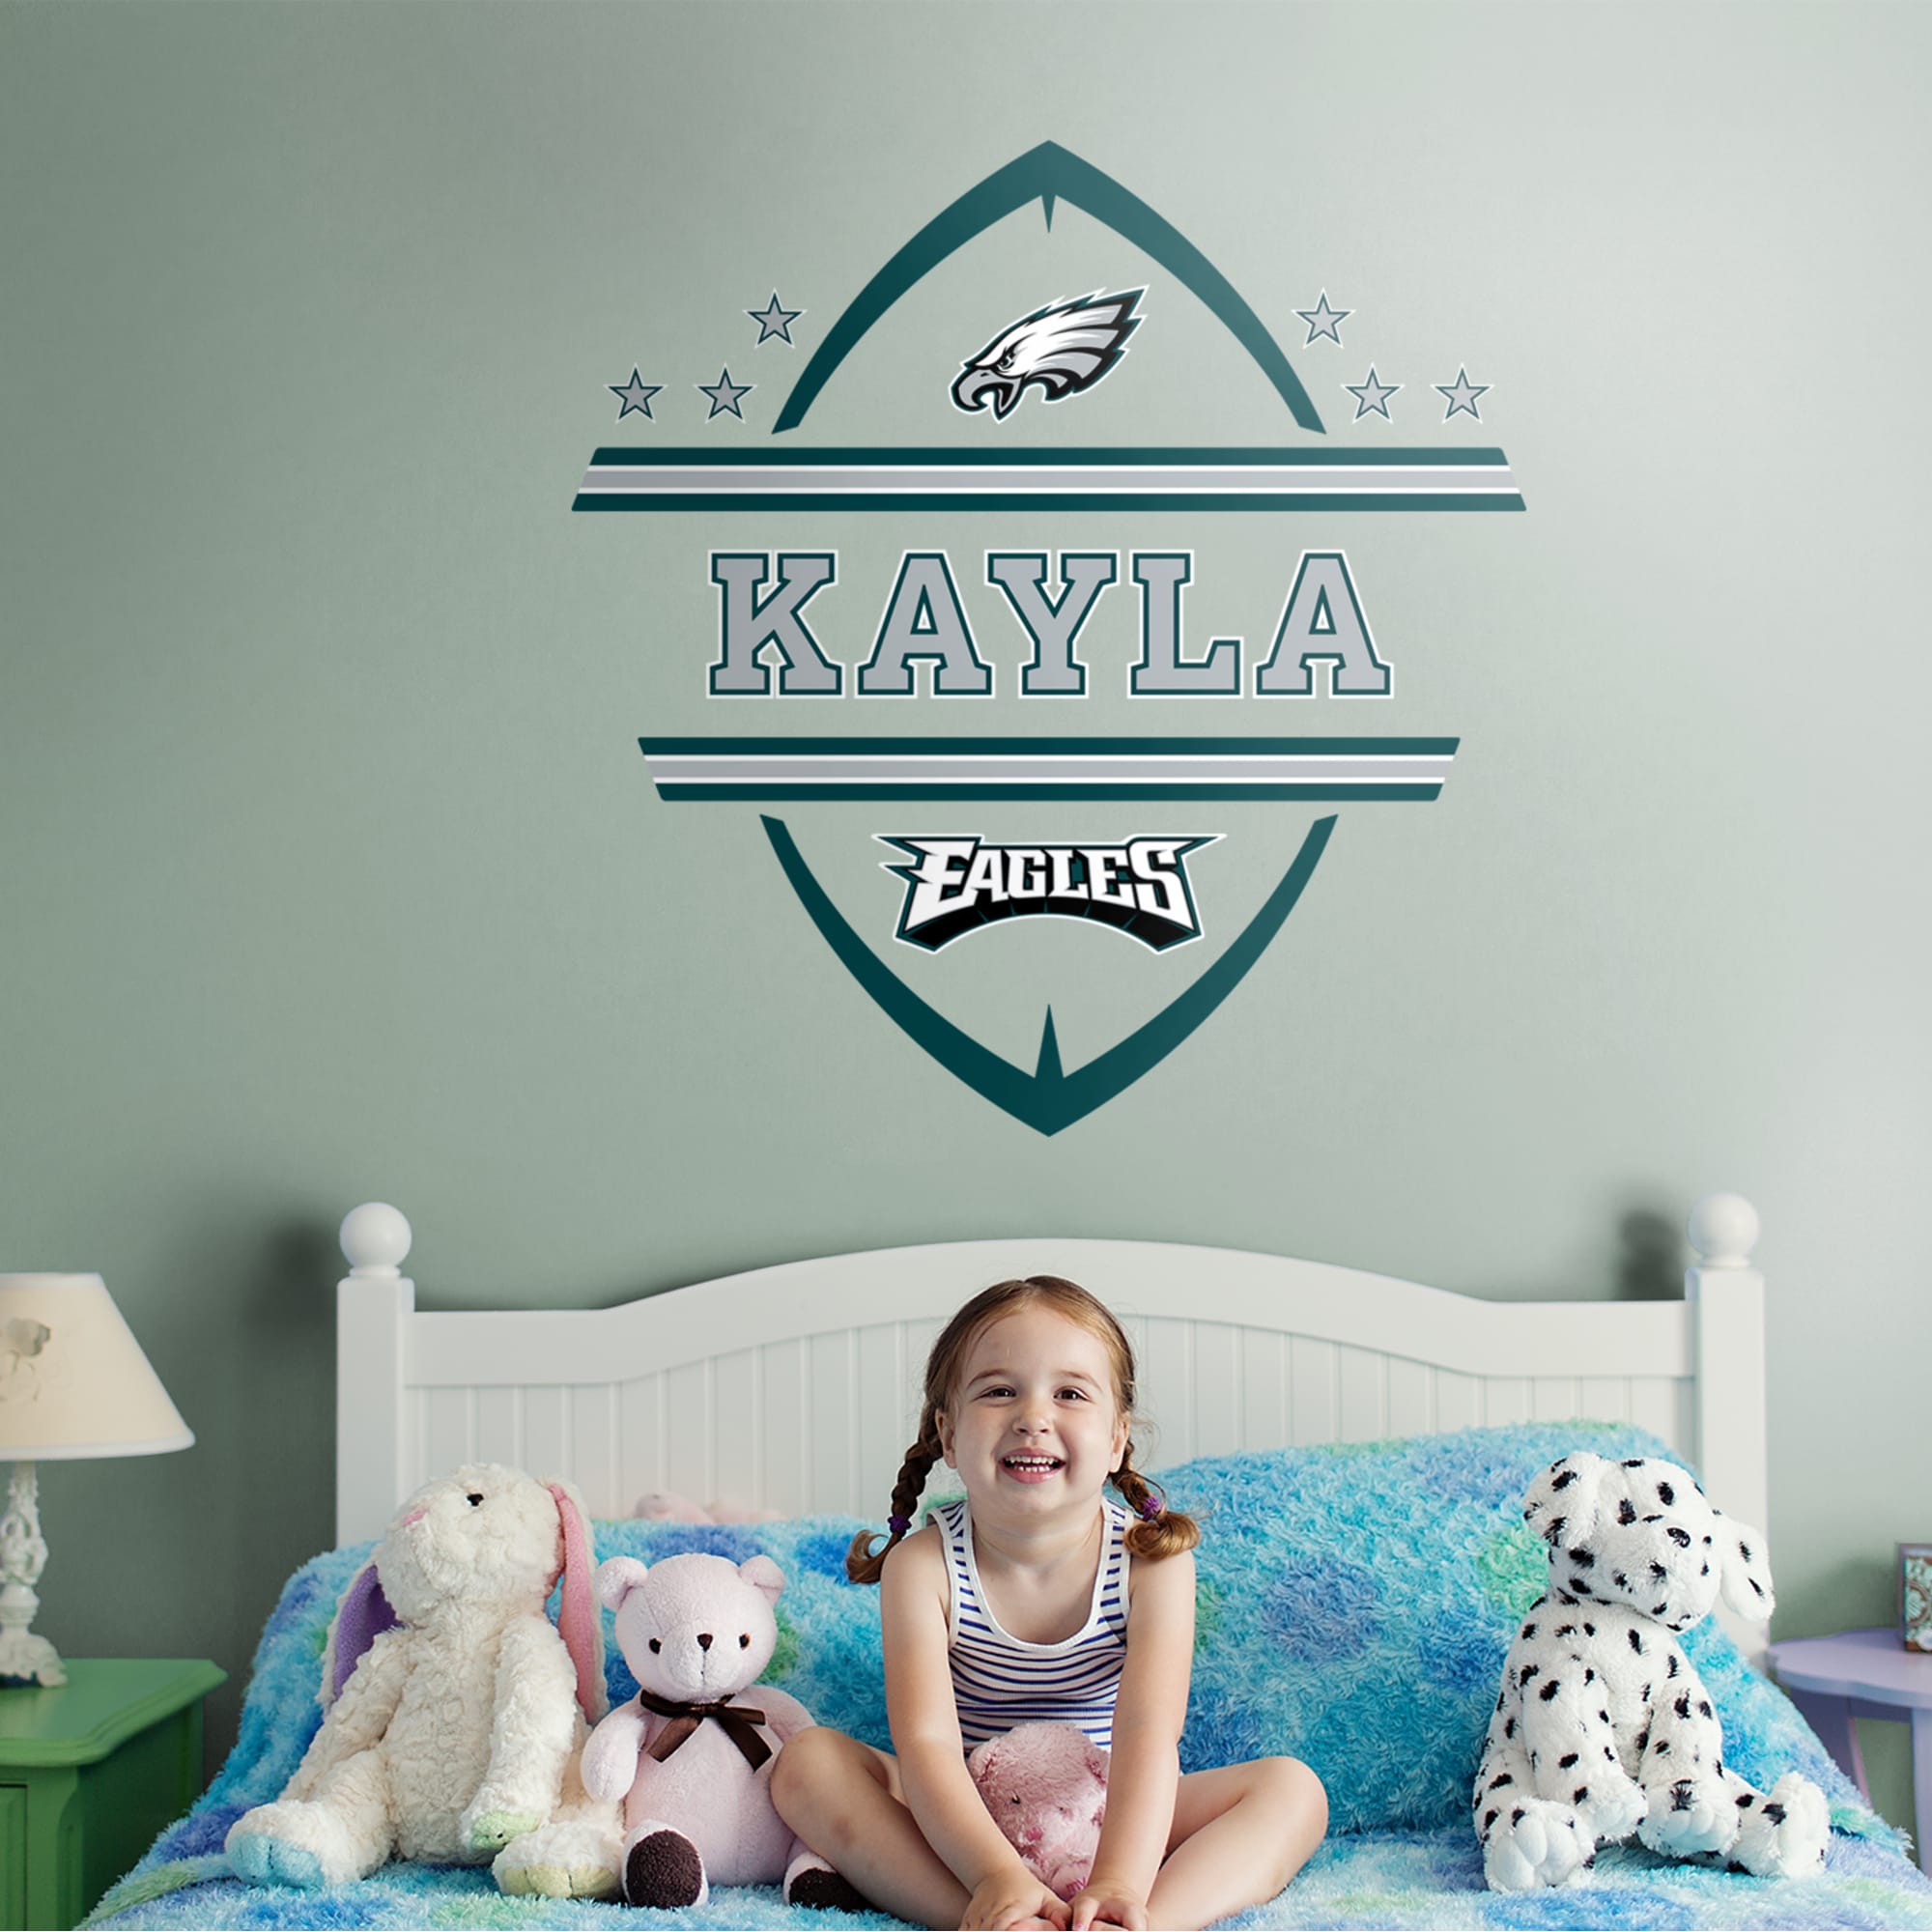 Philadelphia Eagles: Personalized Name - Officially Licensed NFL Transfer Decal 51.0"W x 38.0"H by Fathead | Vinyl